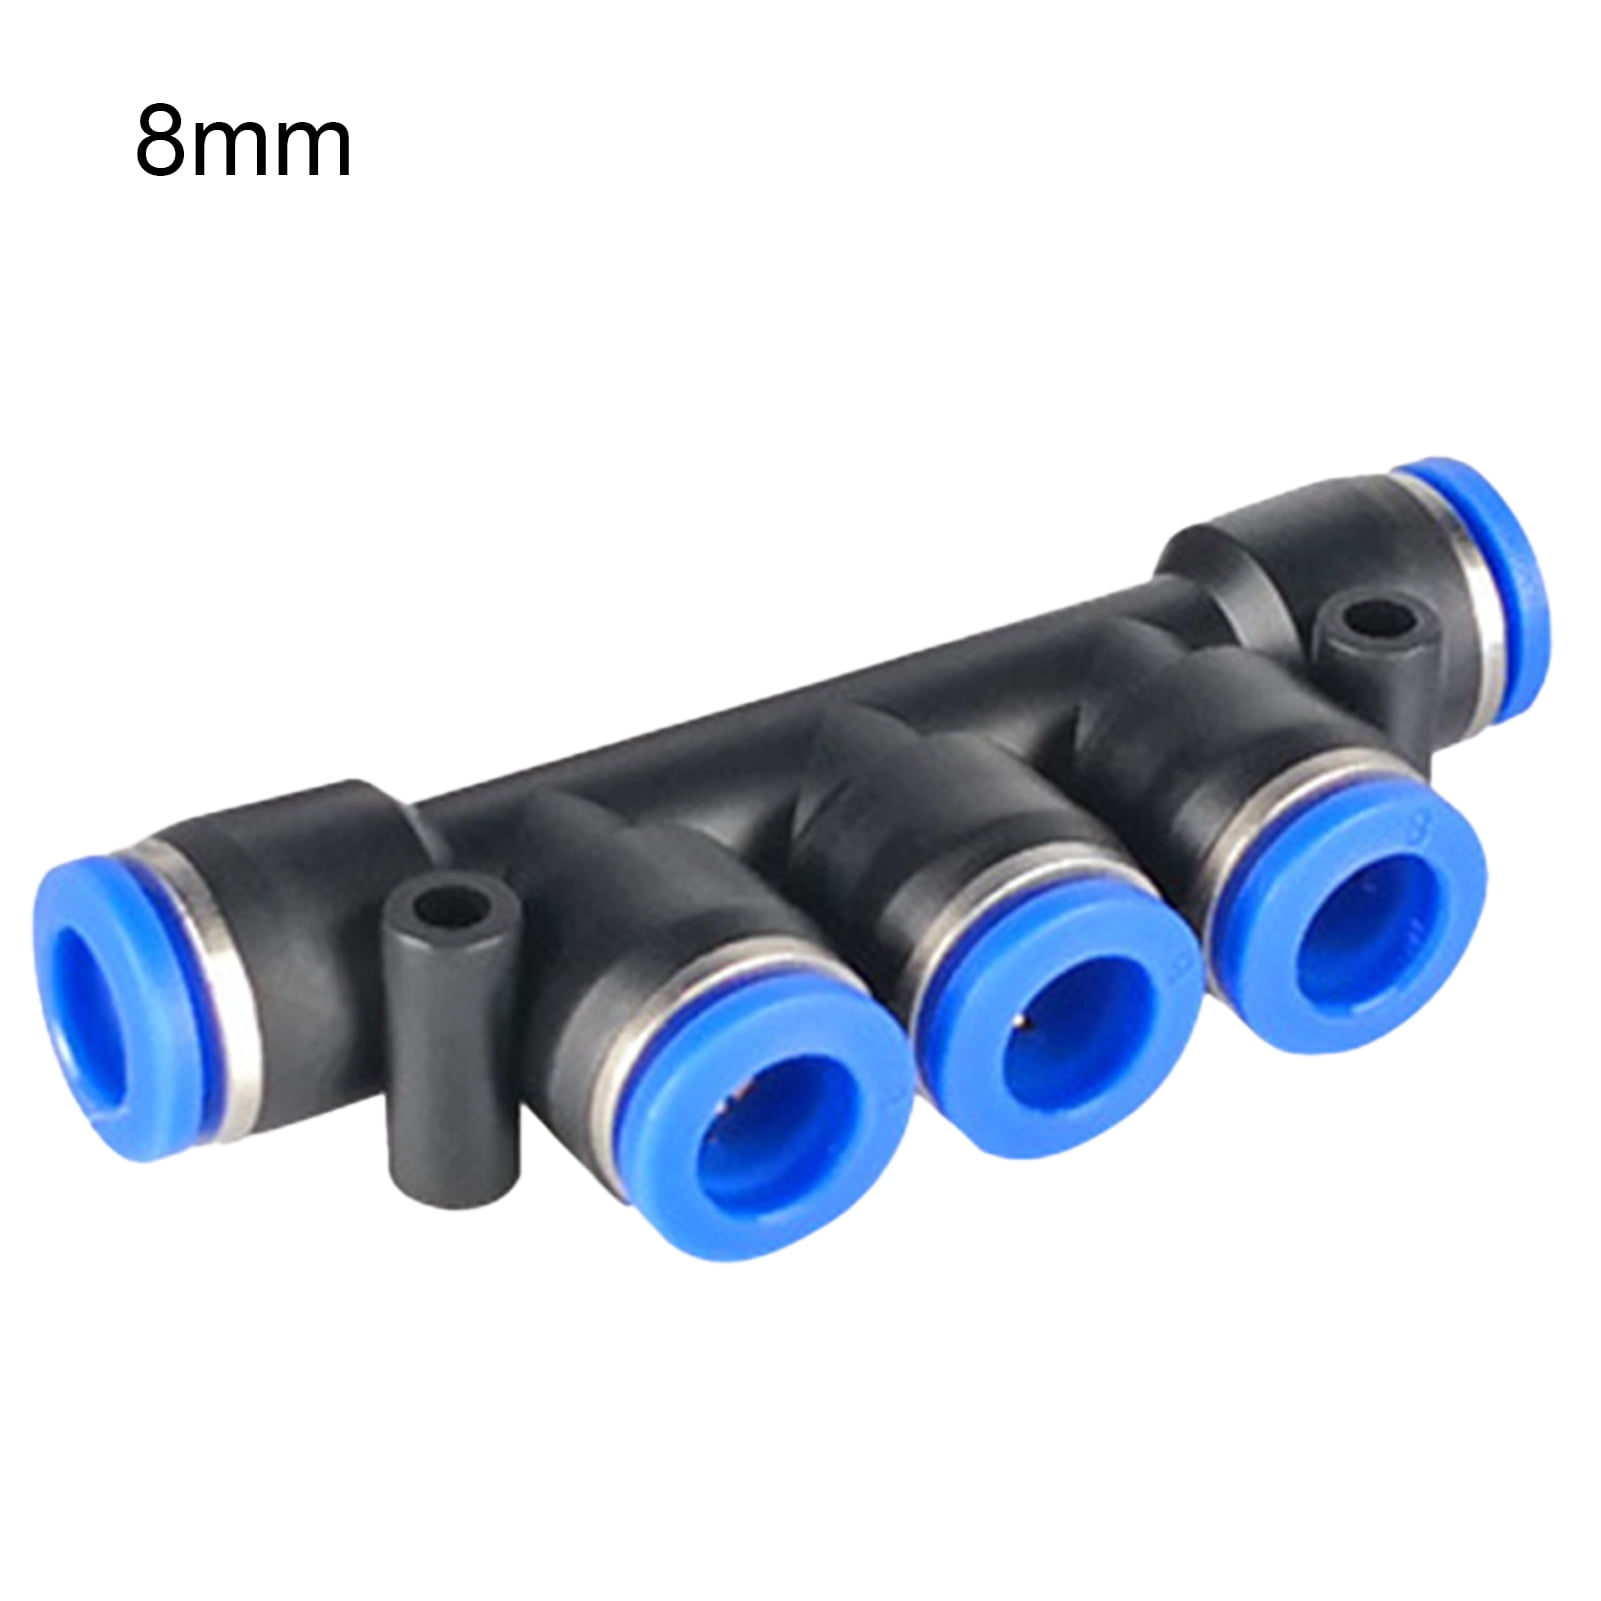 5 pcs PK8 Pneumatic Air Flow Manifold Quick Fittings Connector for 8mm Tube Hose 